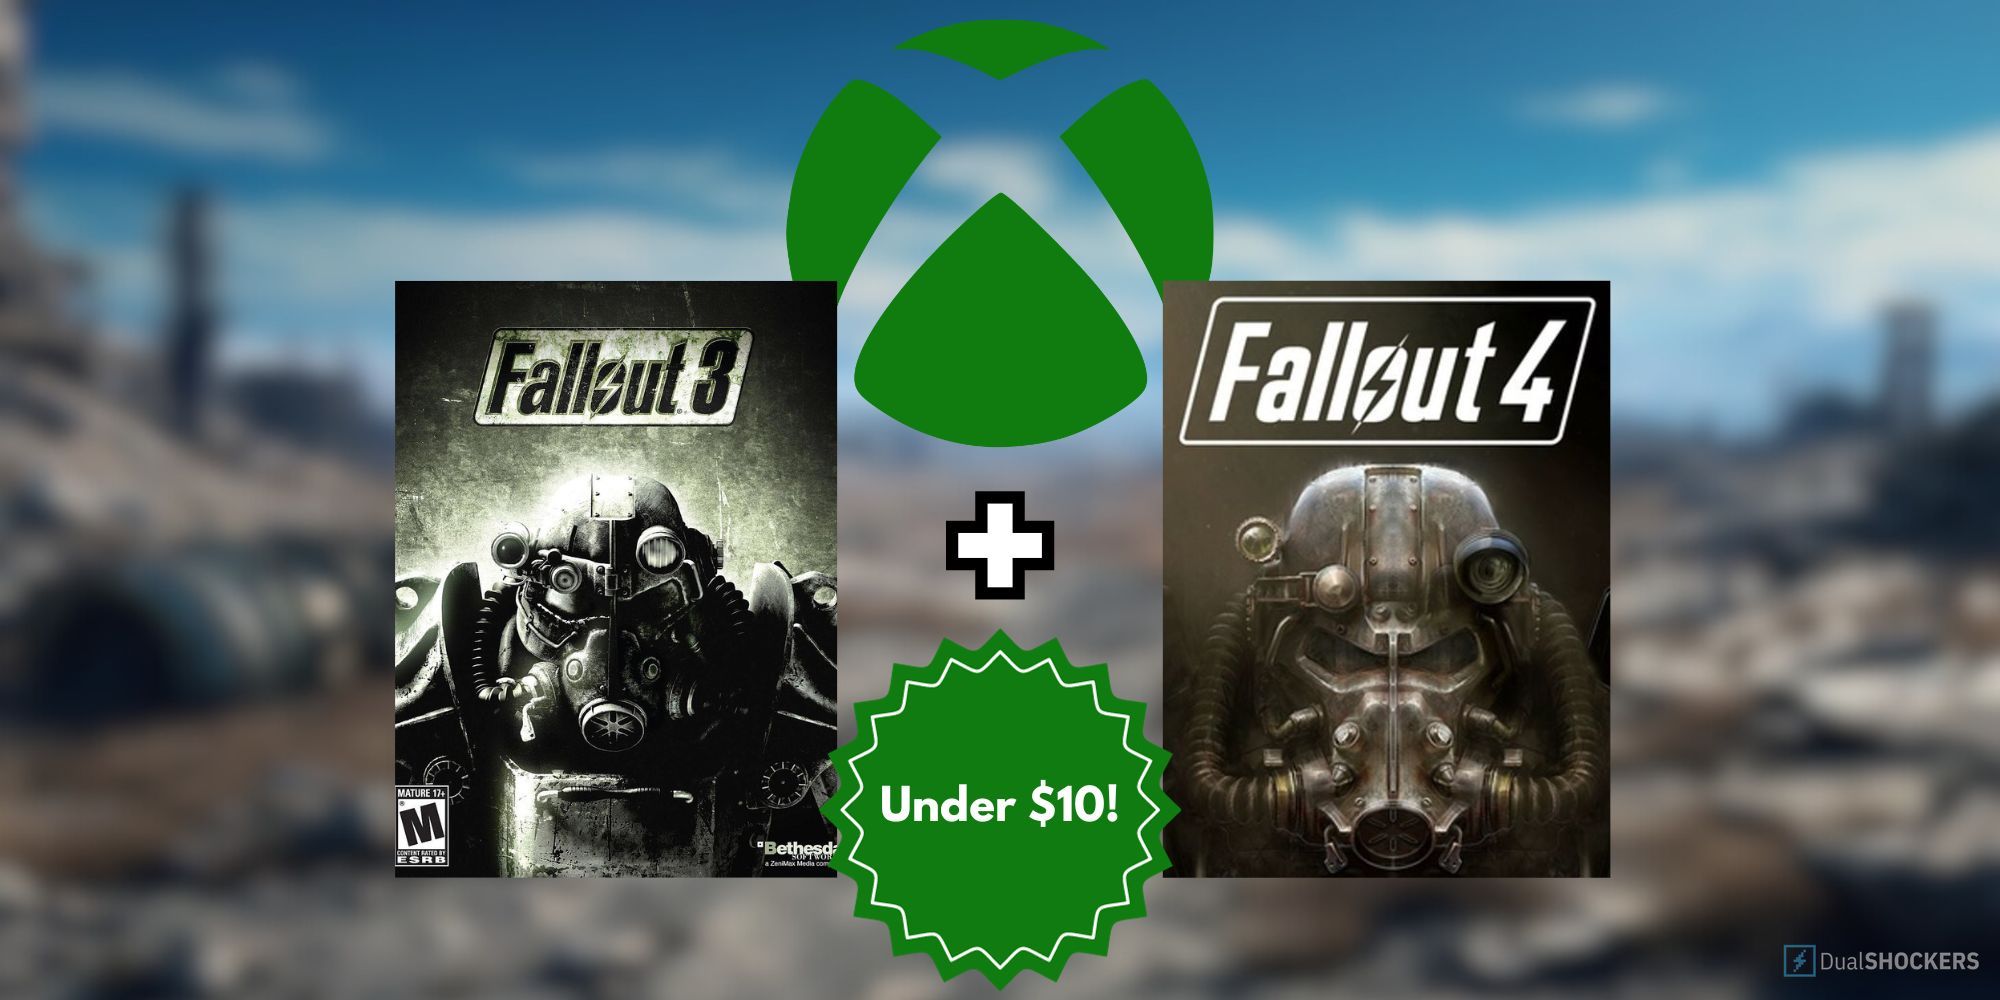 Feature image with the covers from Fallout 3 & Fallout 4 on a blurry wasteland background with a green 